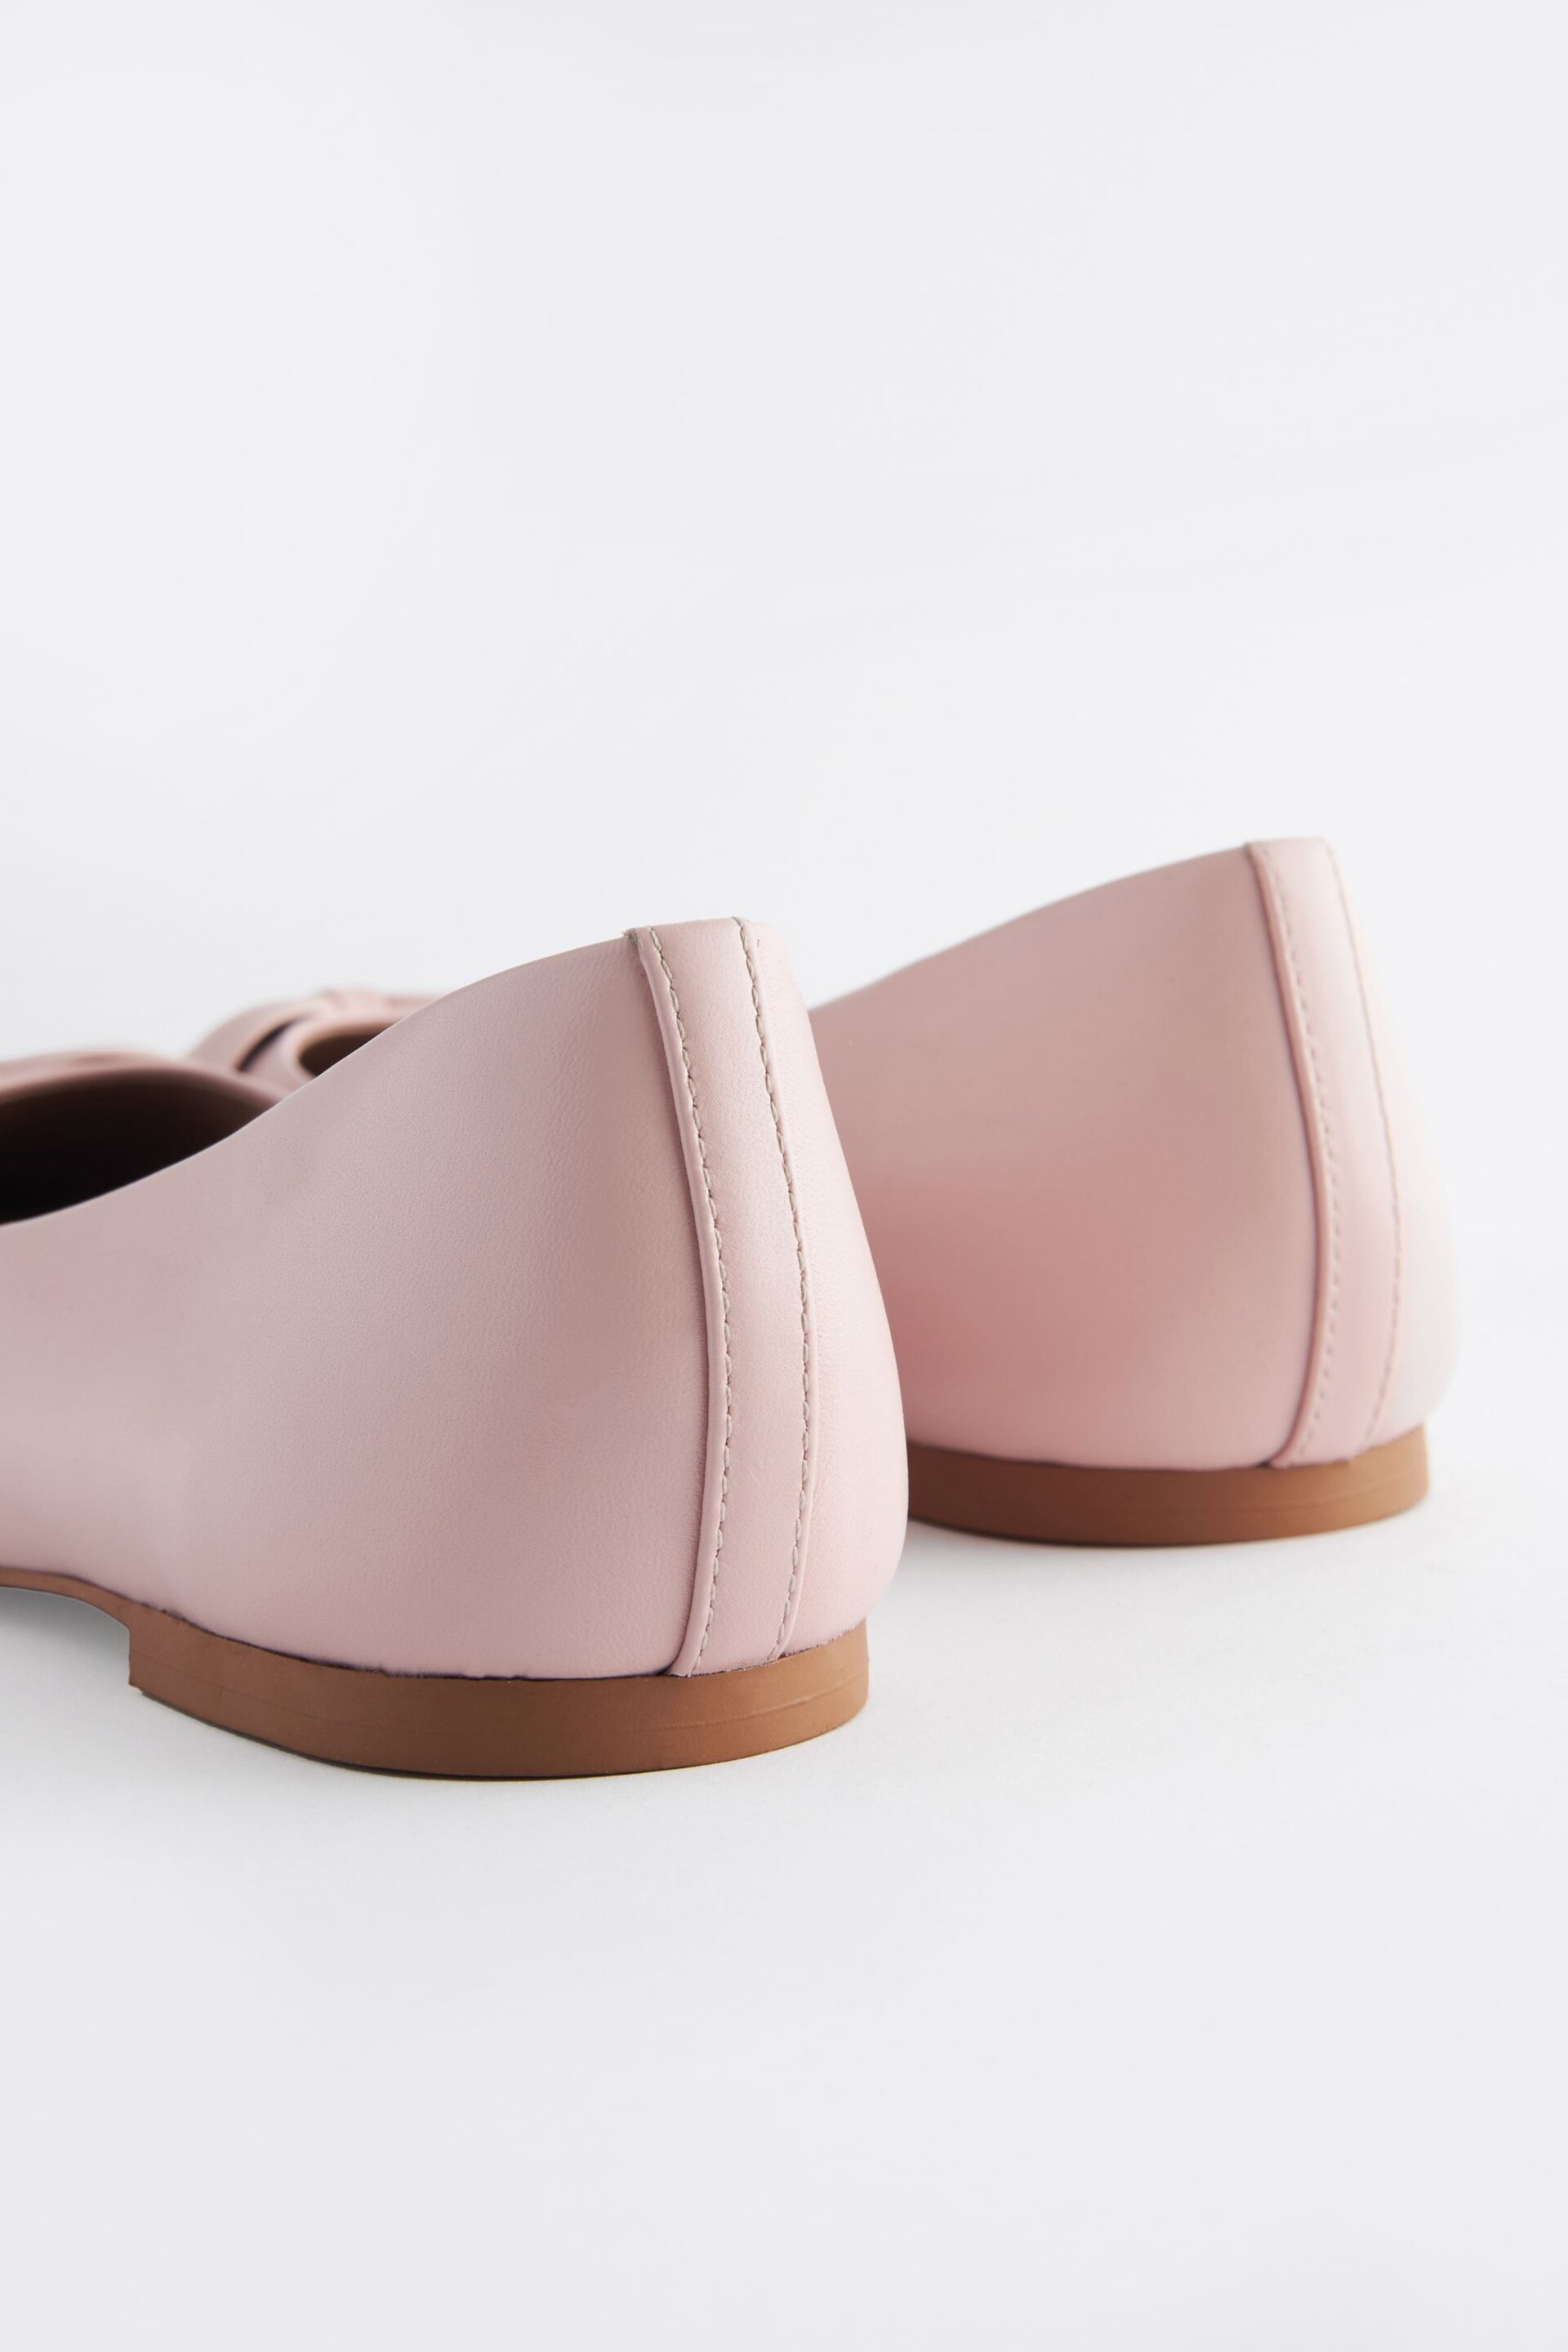 Pink Regular/Wide Fit Forever Comfort® Leather Square Toe Bow Ballerinas - Image 4 of 5